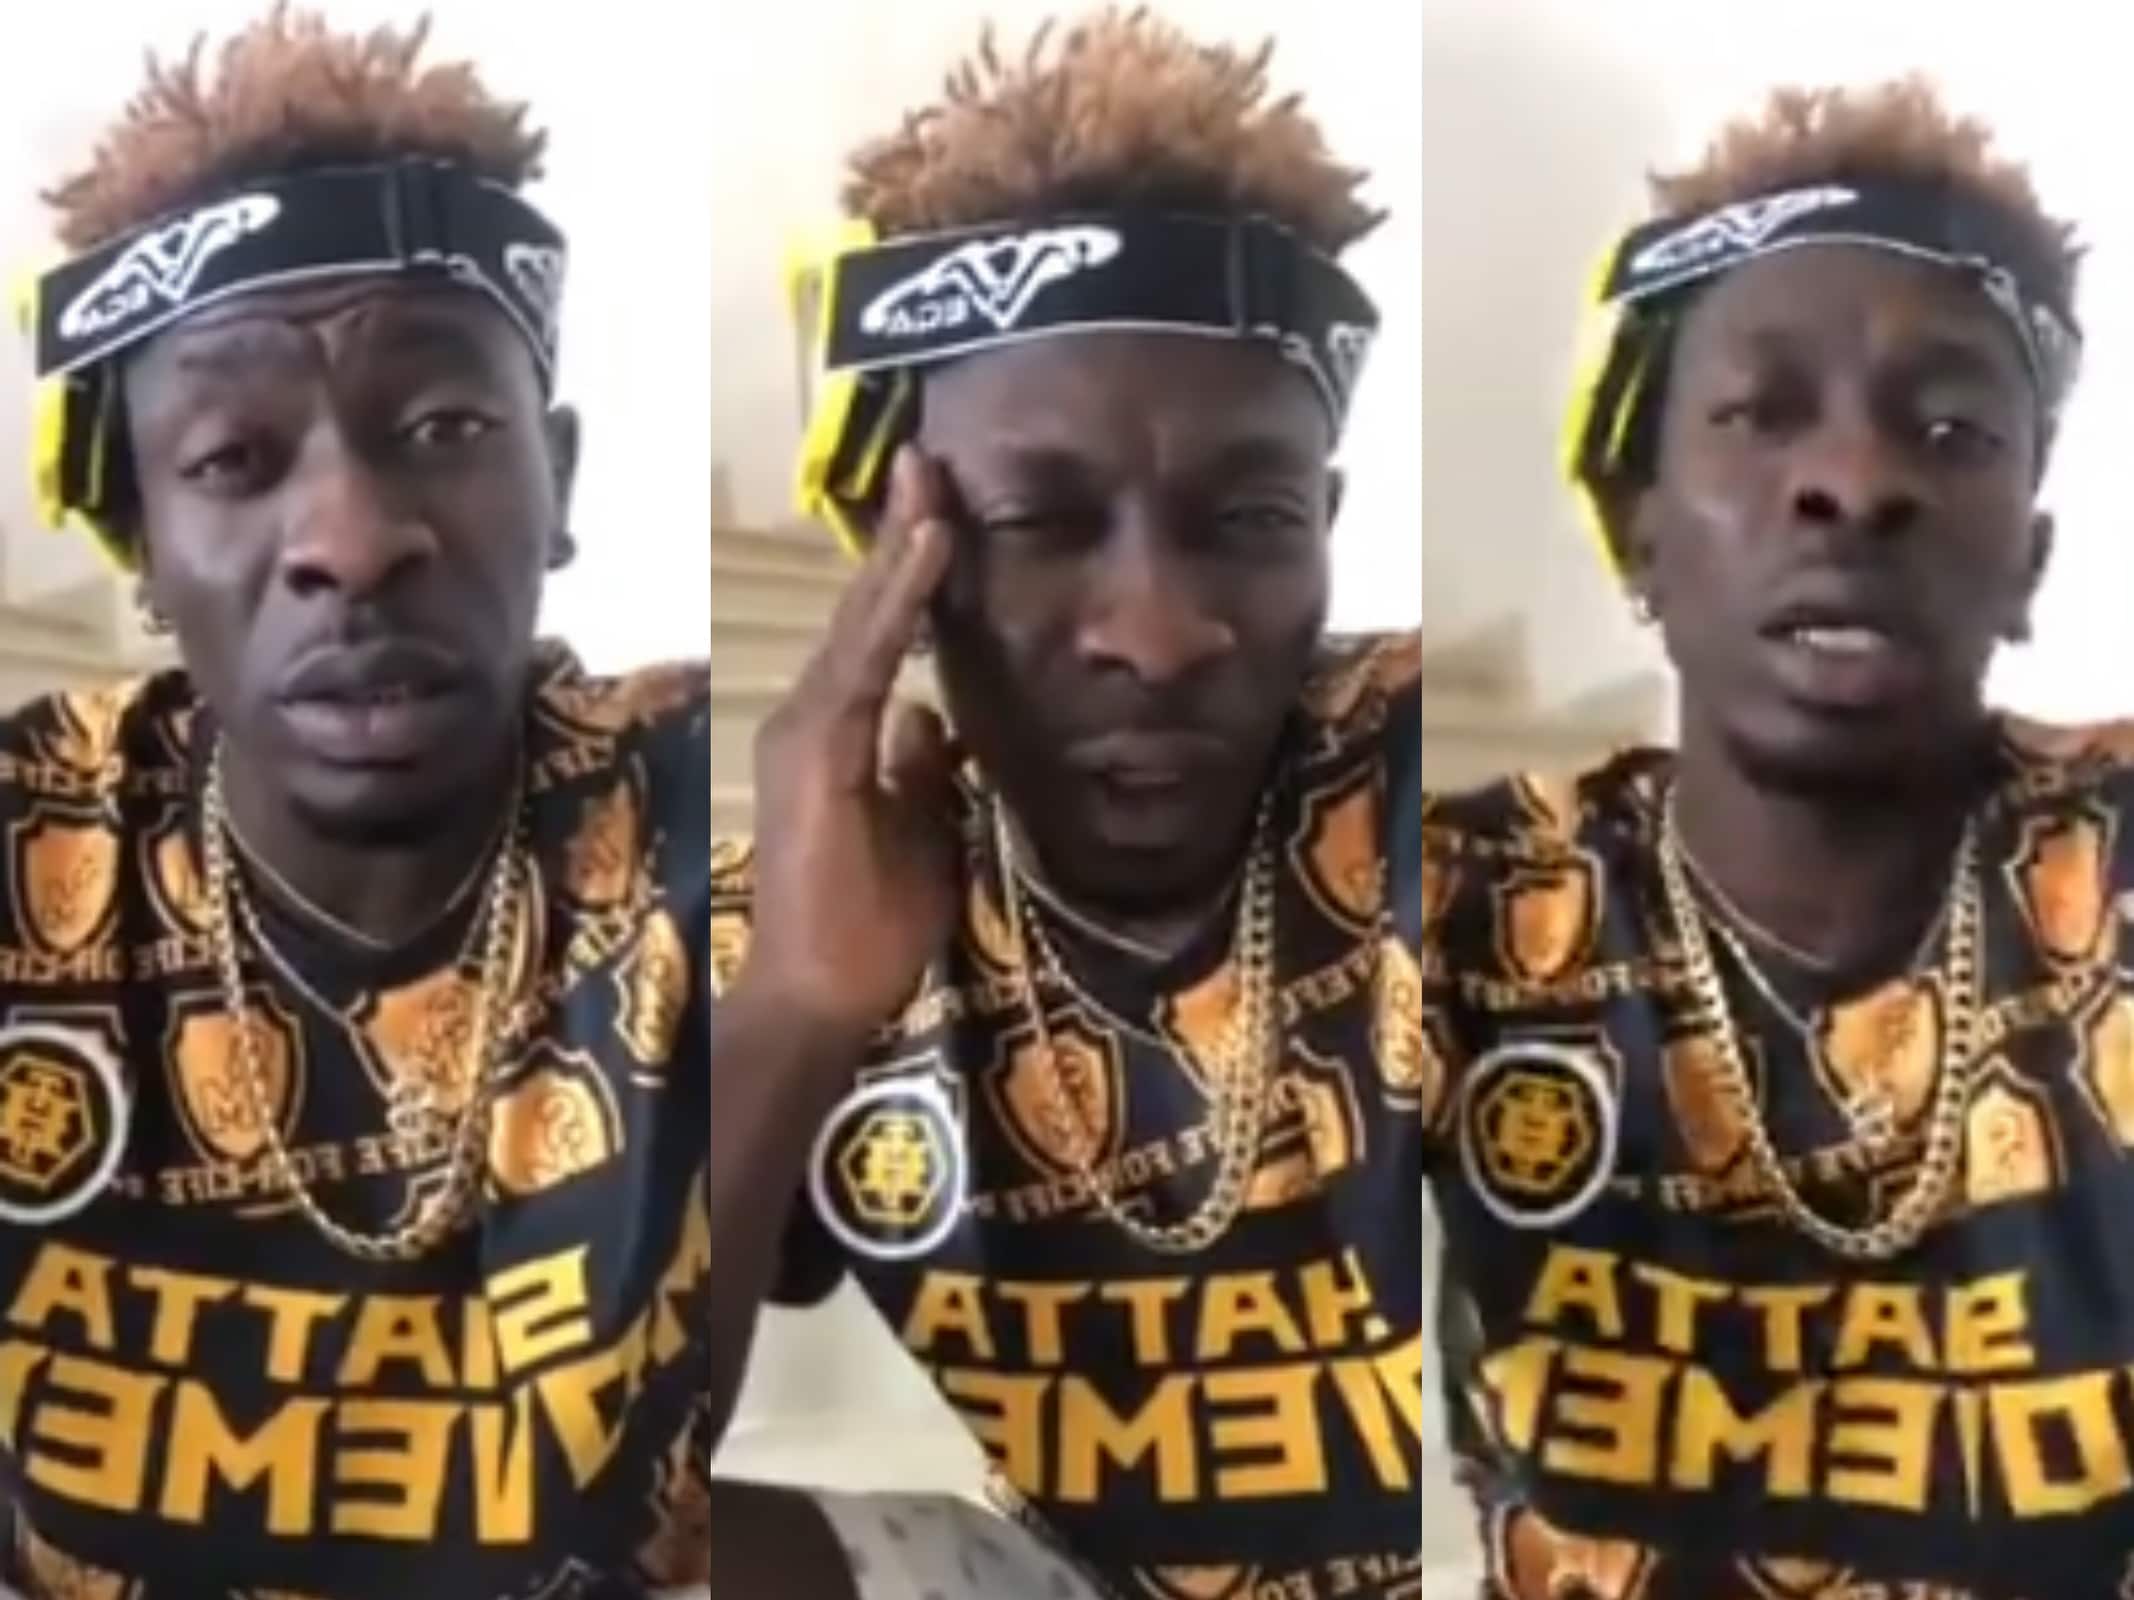 Shatta Wale to sue lady who claims he duped her of $45k